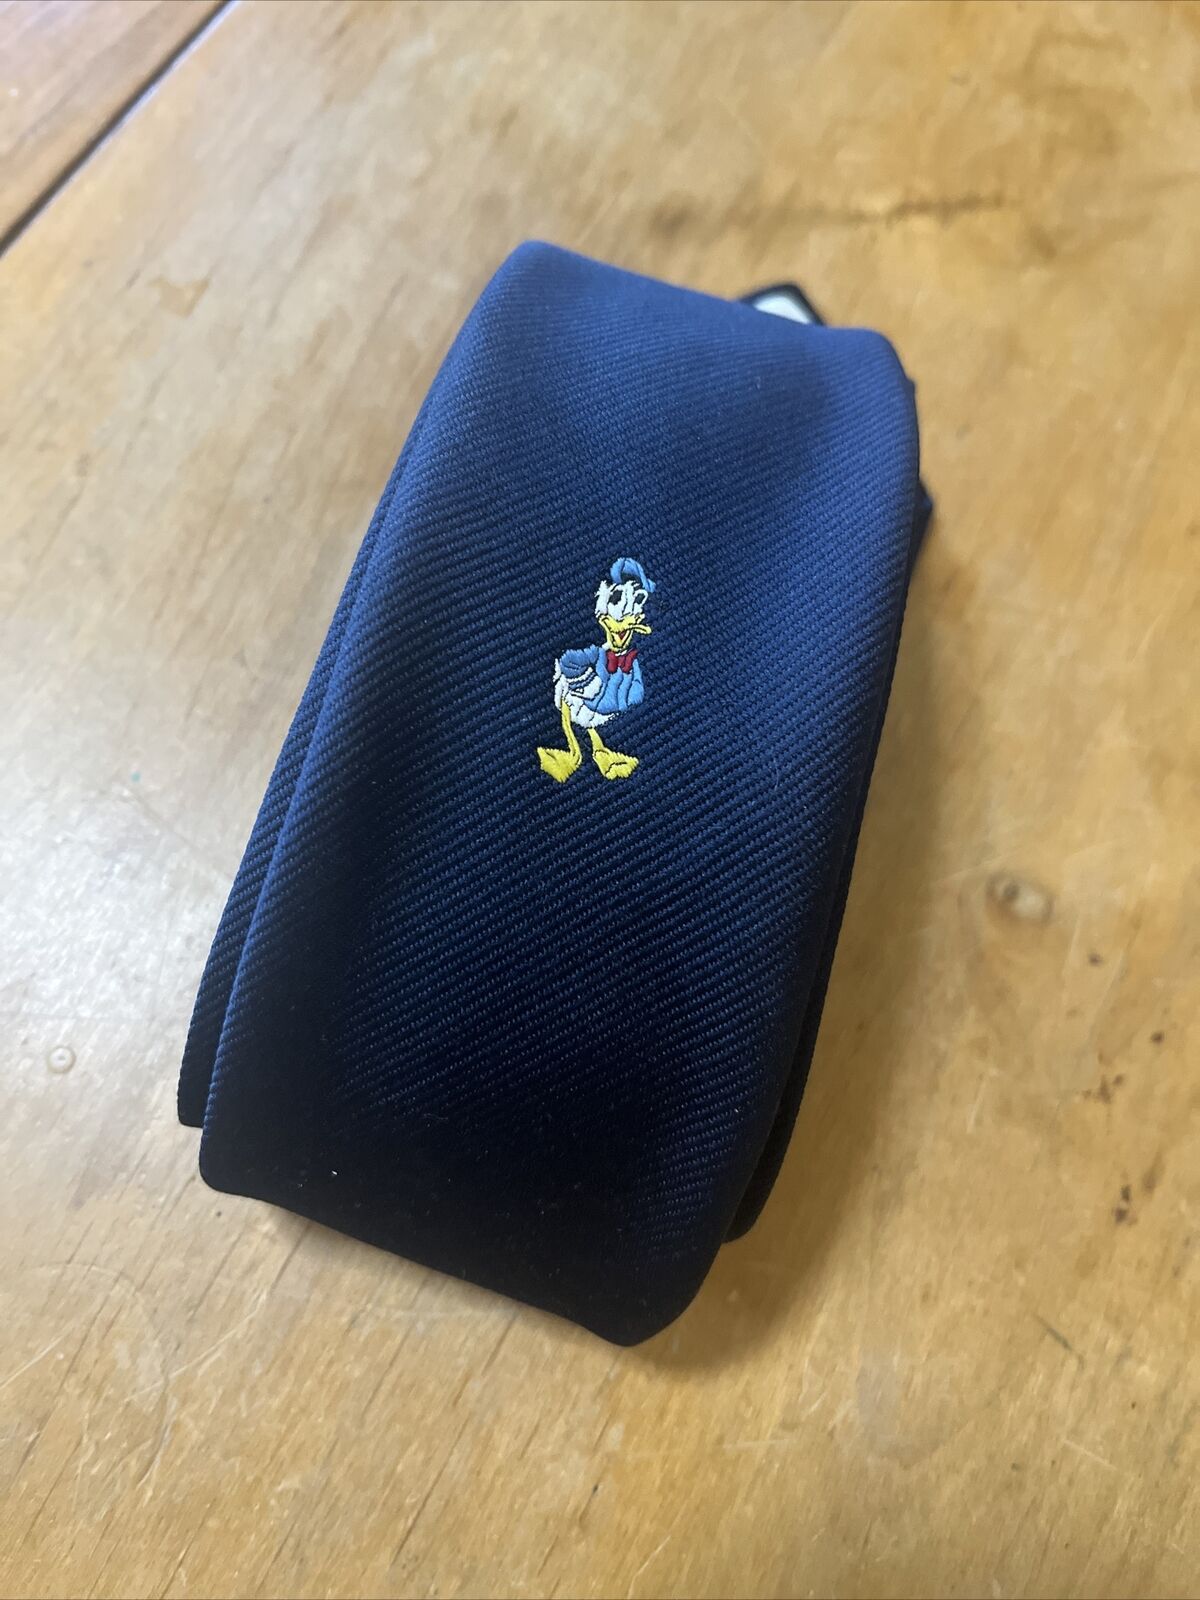 Vintage 60s/70s Cervantes Mickey Mouse Embroidered Skinny Donald Duck Tie Navy